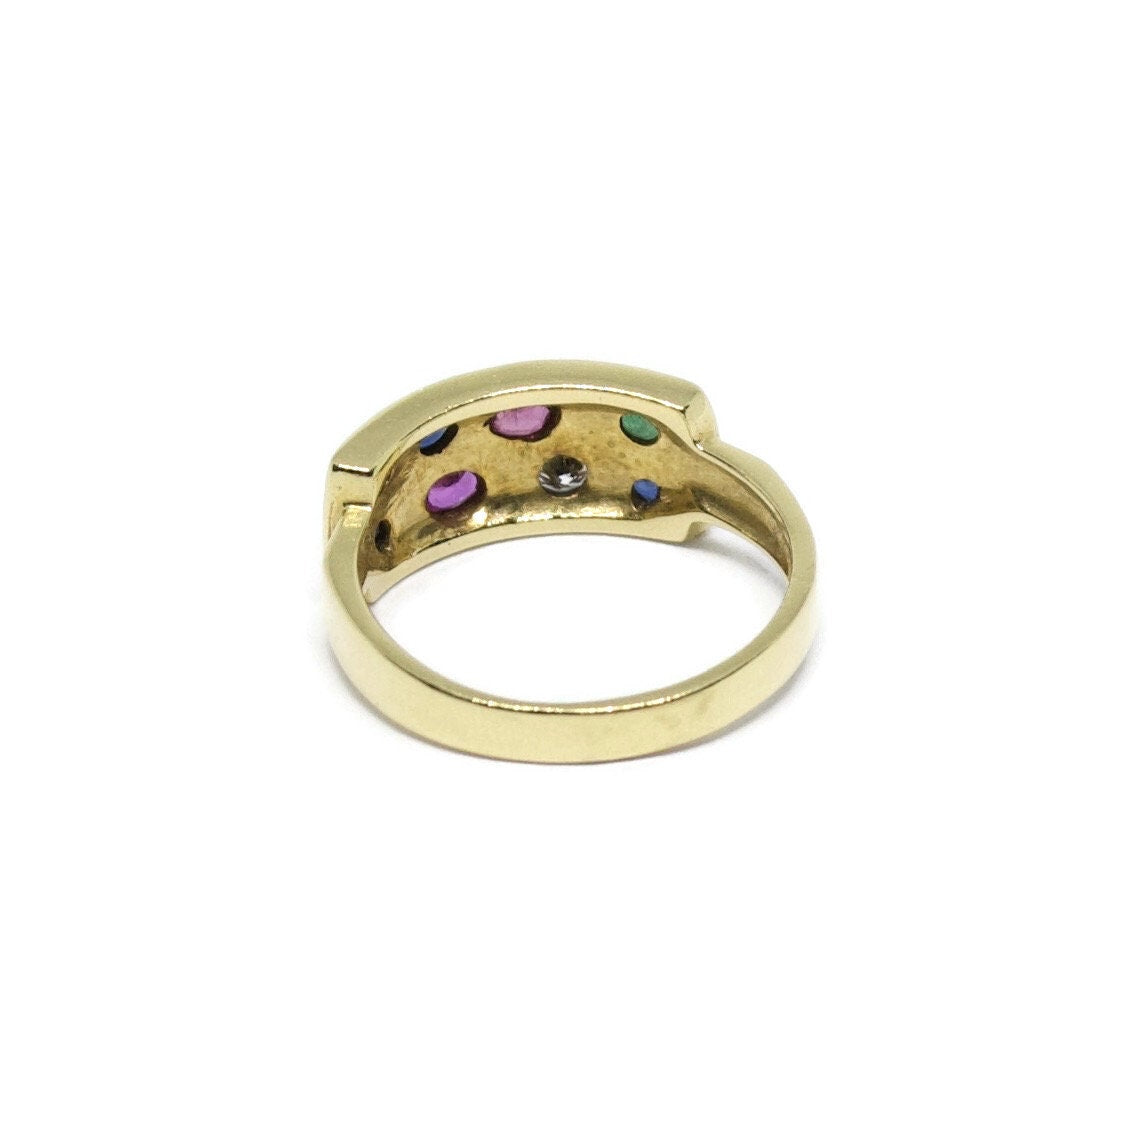 Sapphires Rubies, Emeralds and Diamonds 18k Solid Gold Ring, Round Cut Gemstones